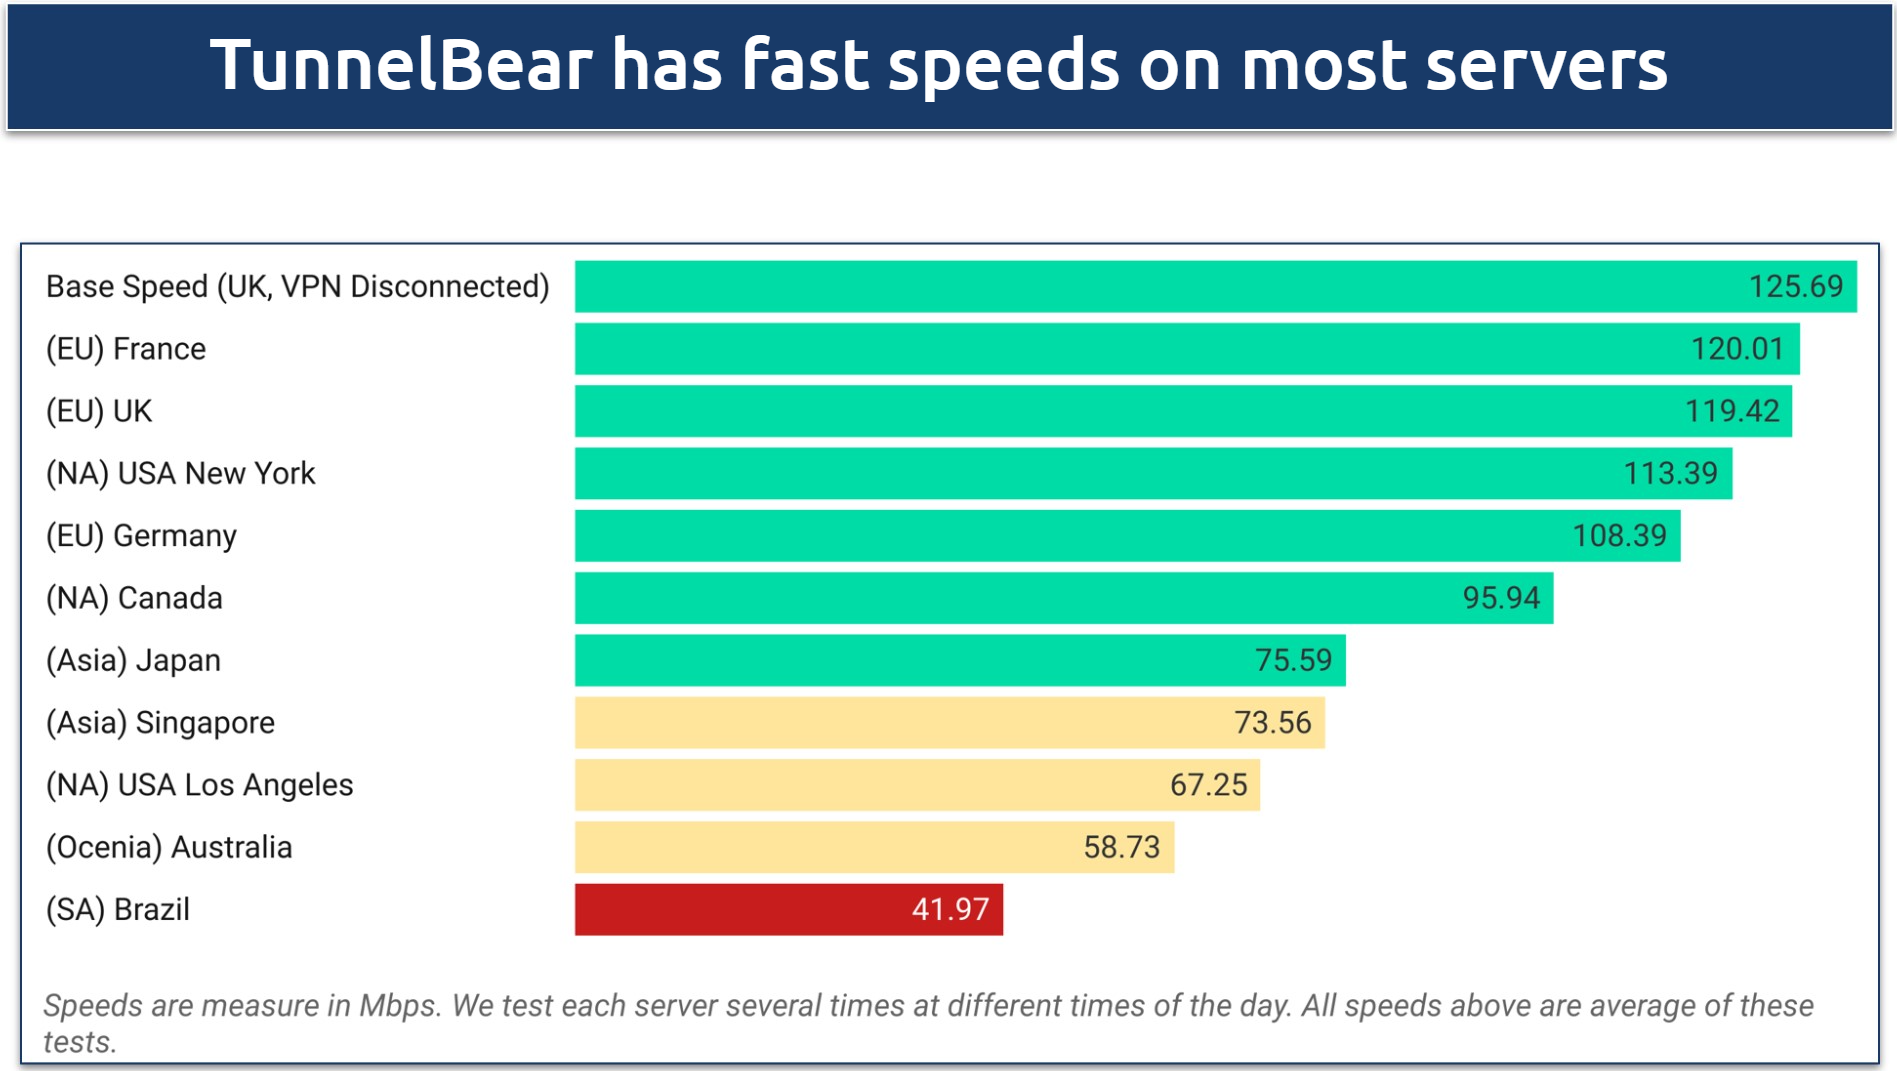 A screenshot showing TunnelBear's speed results for the paid version across servers in Europe, North America, Asia, and Oceania